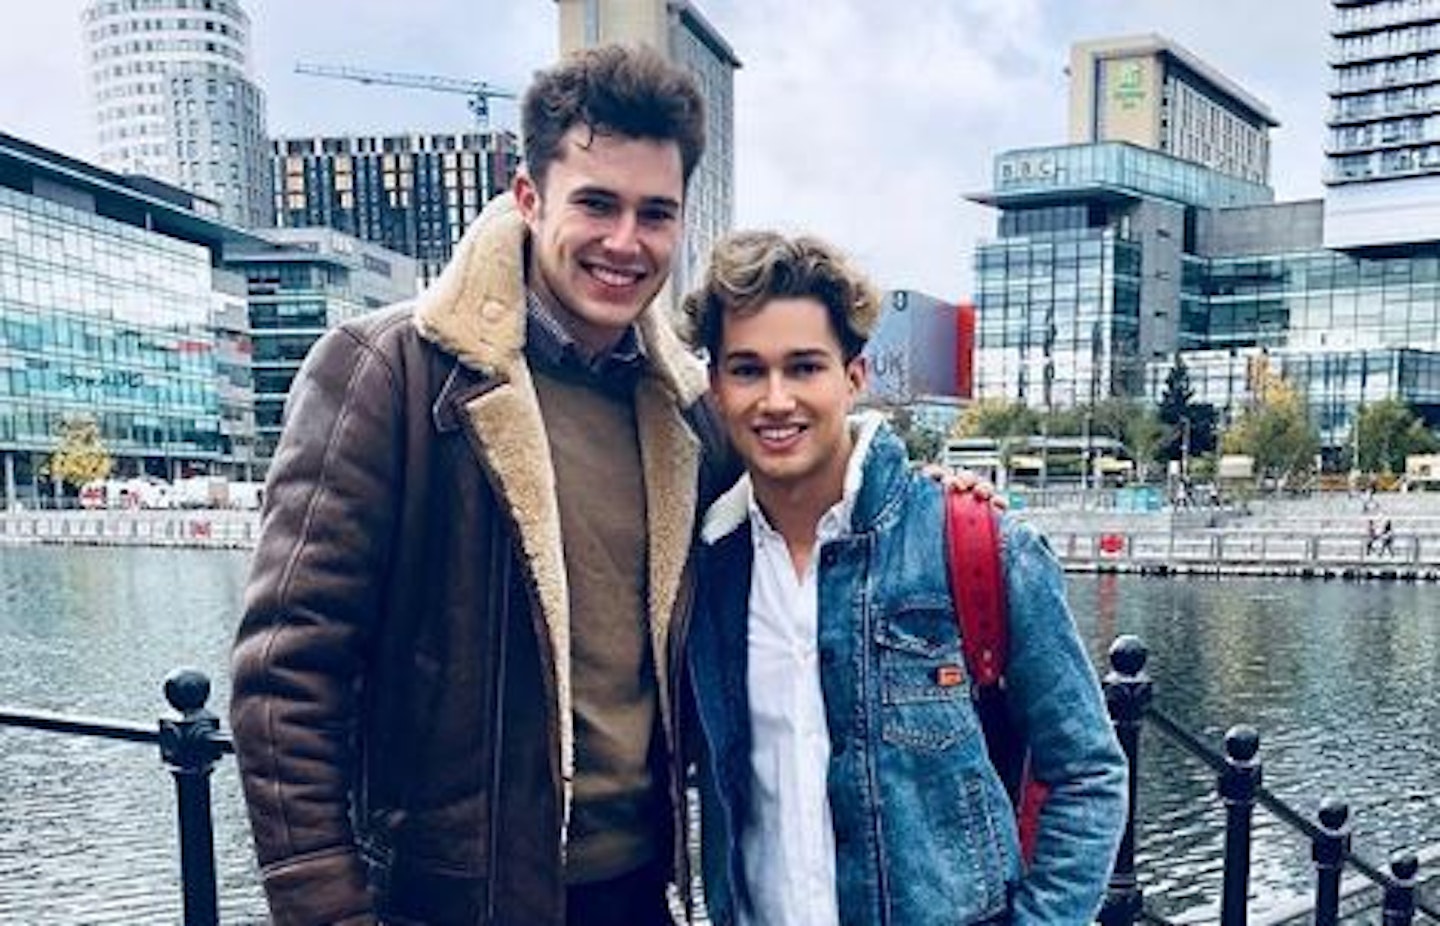 AJ Pritchard and his brother Curtis